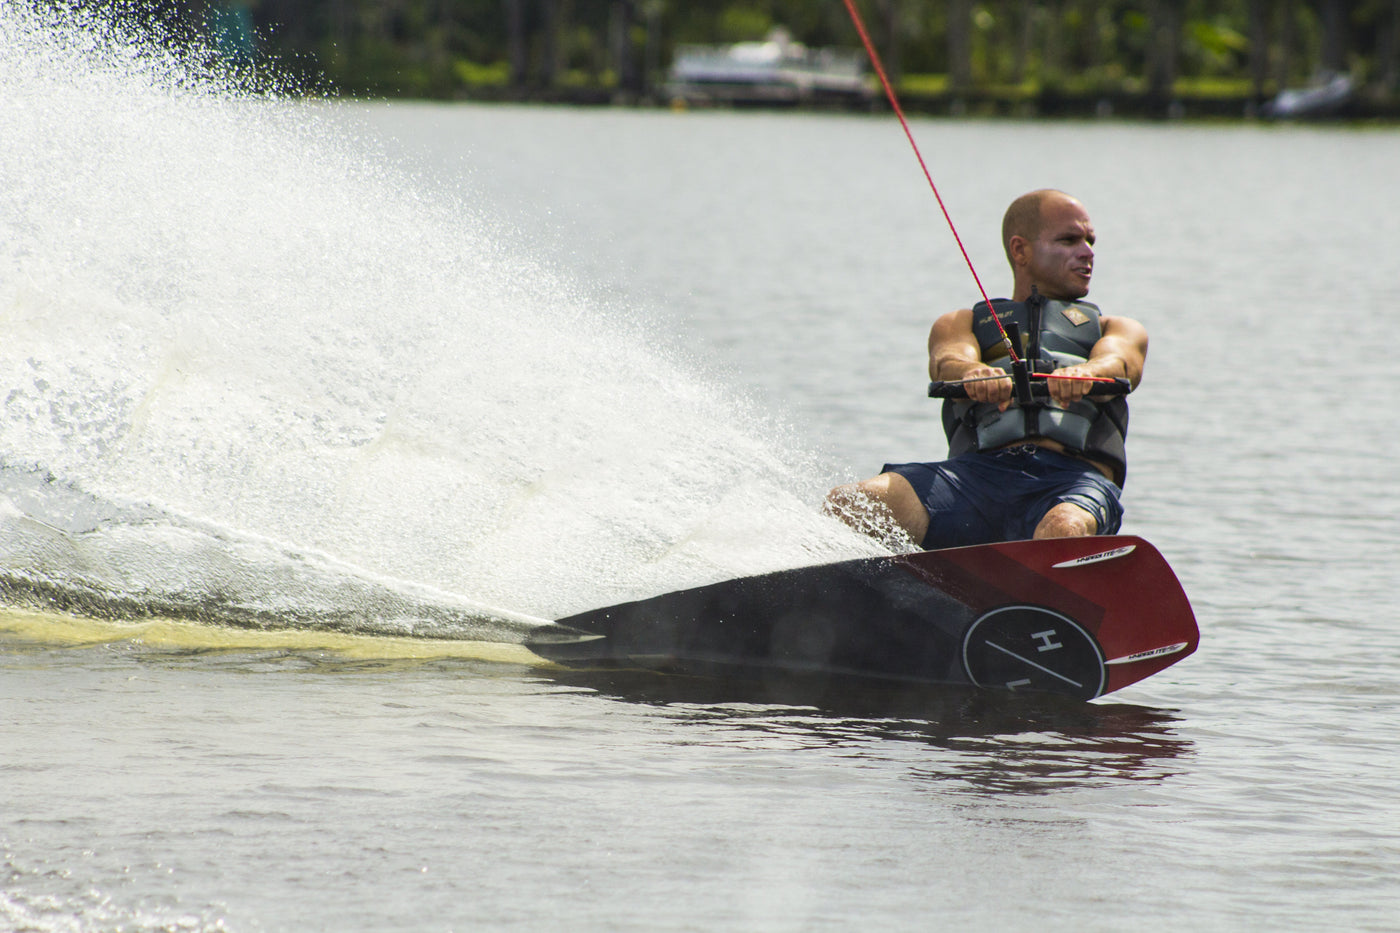 lifestyle of shaun murray wakeboarding out on the open water wearing his signature vest